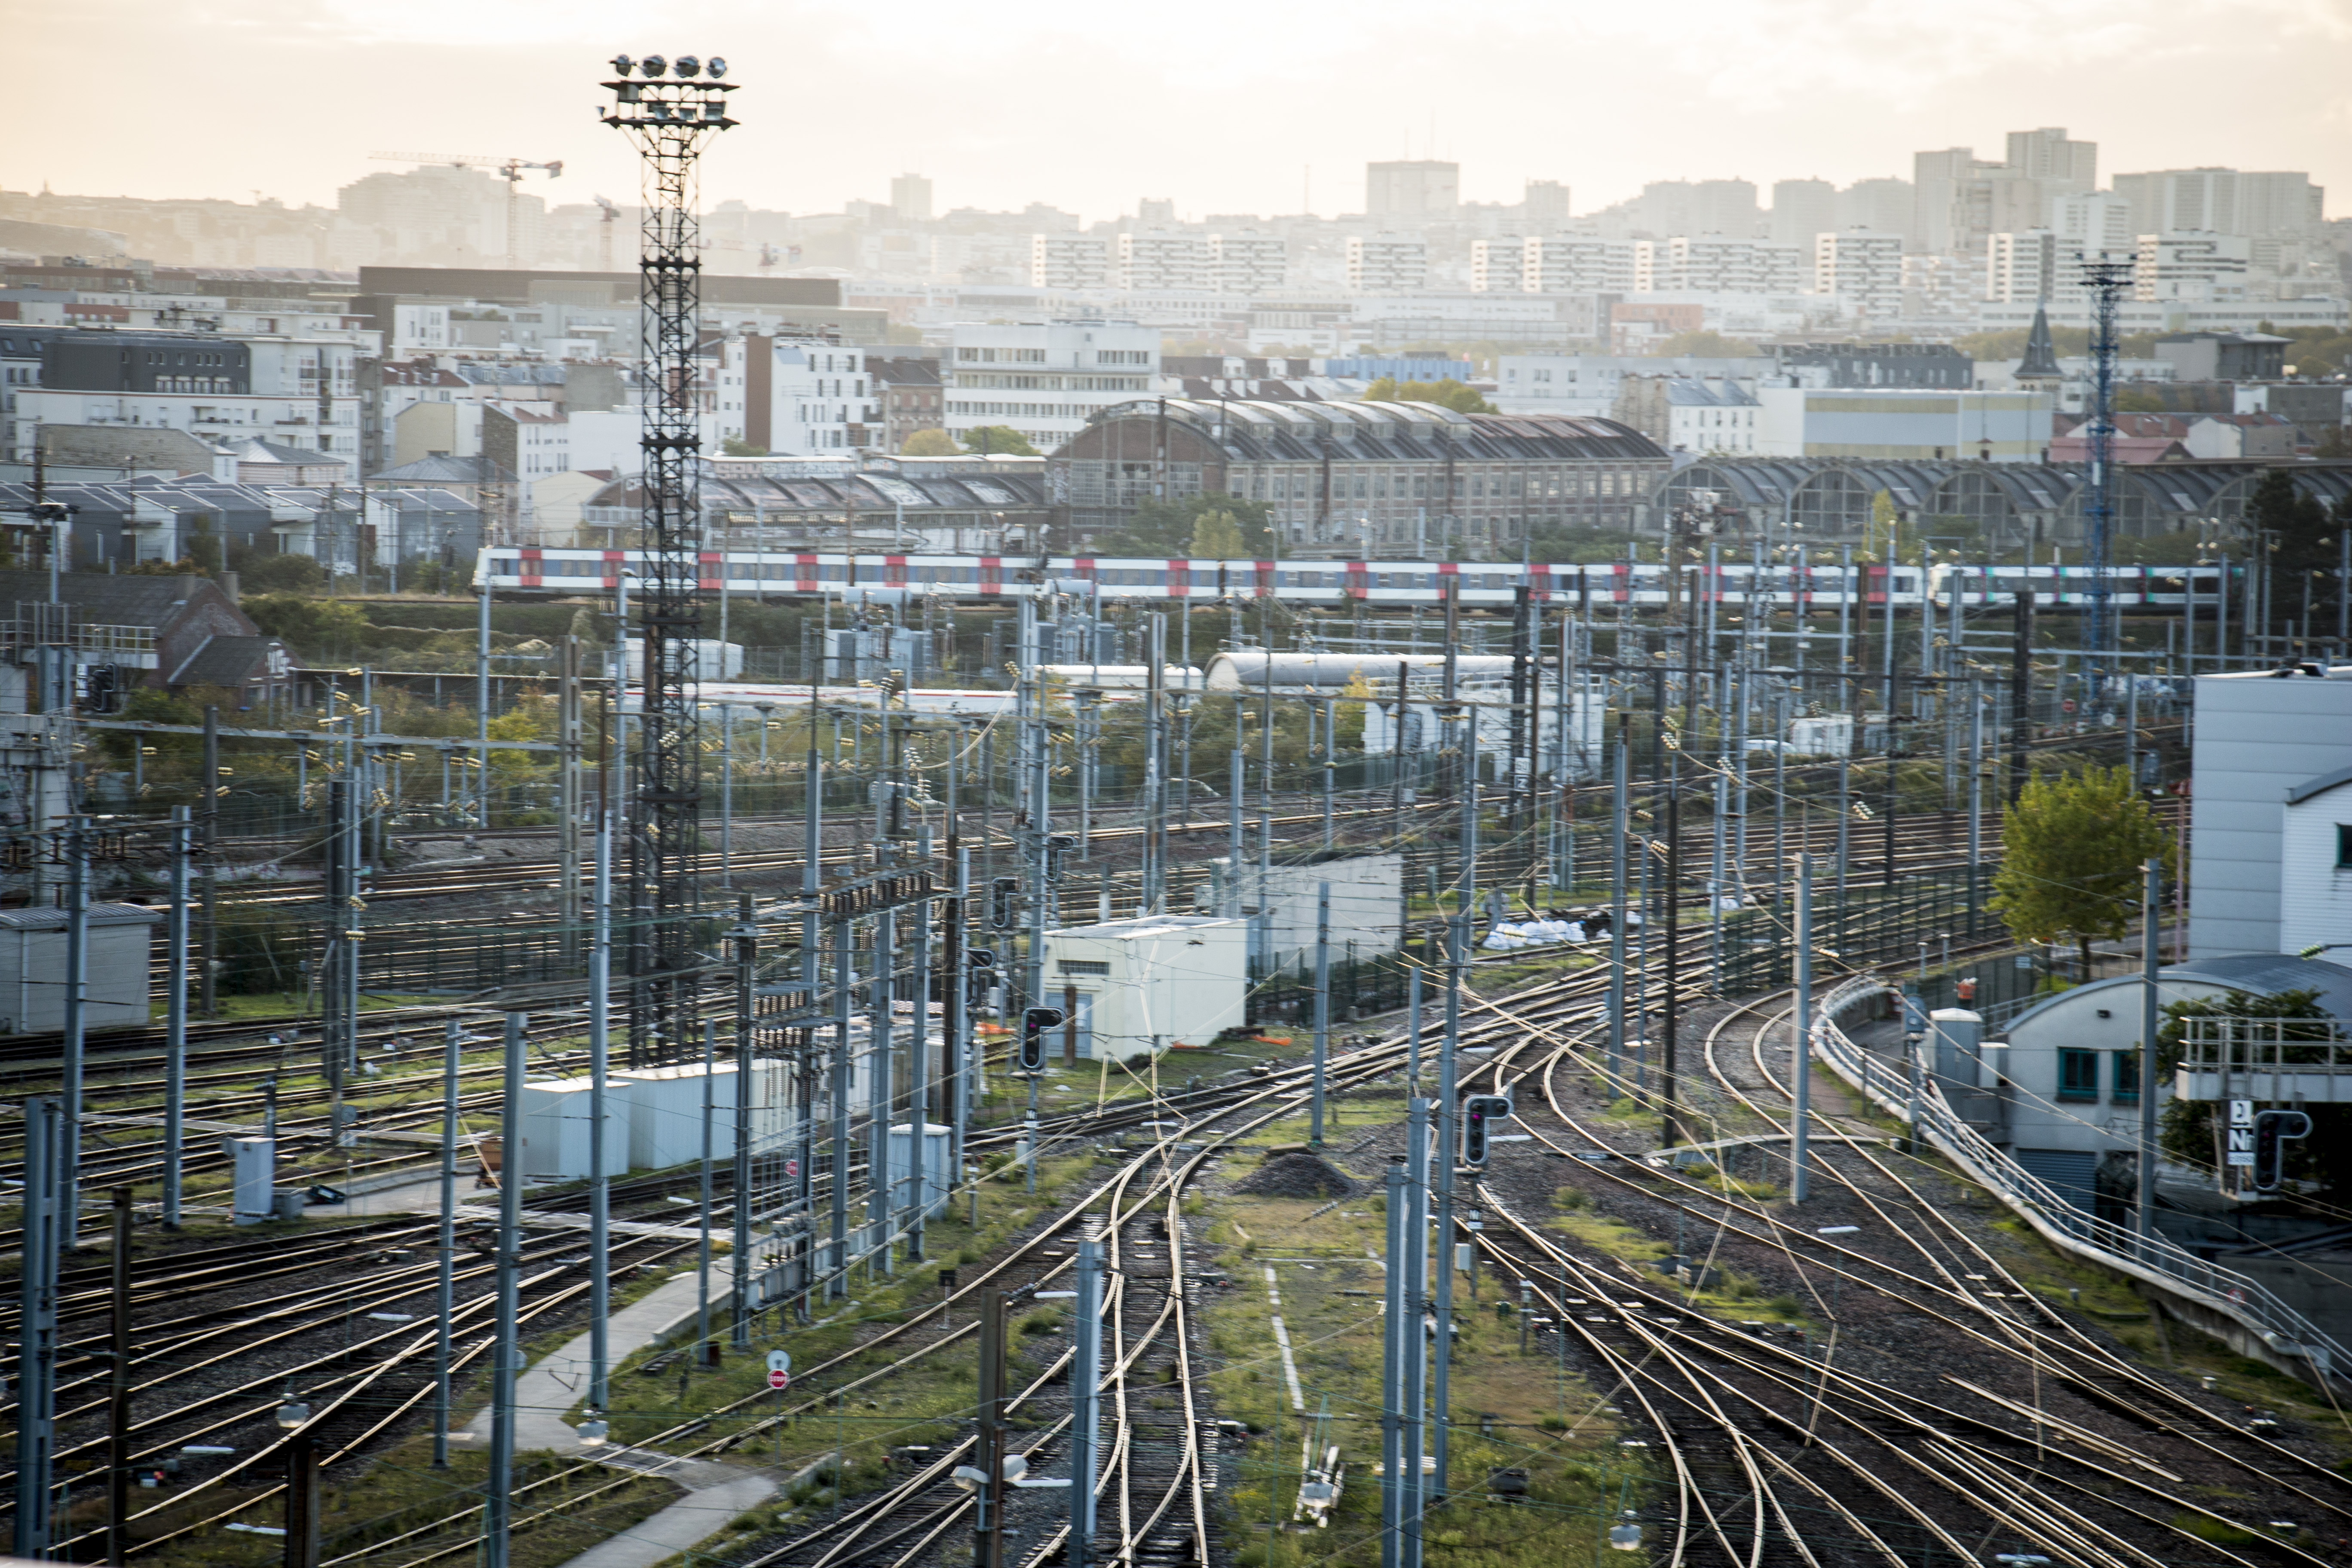 Grand Paris Express: the largest infrastructure project currently under construction in Europe. | Trevi 2